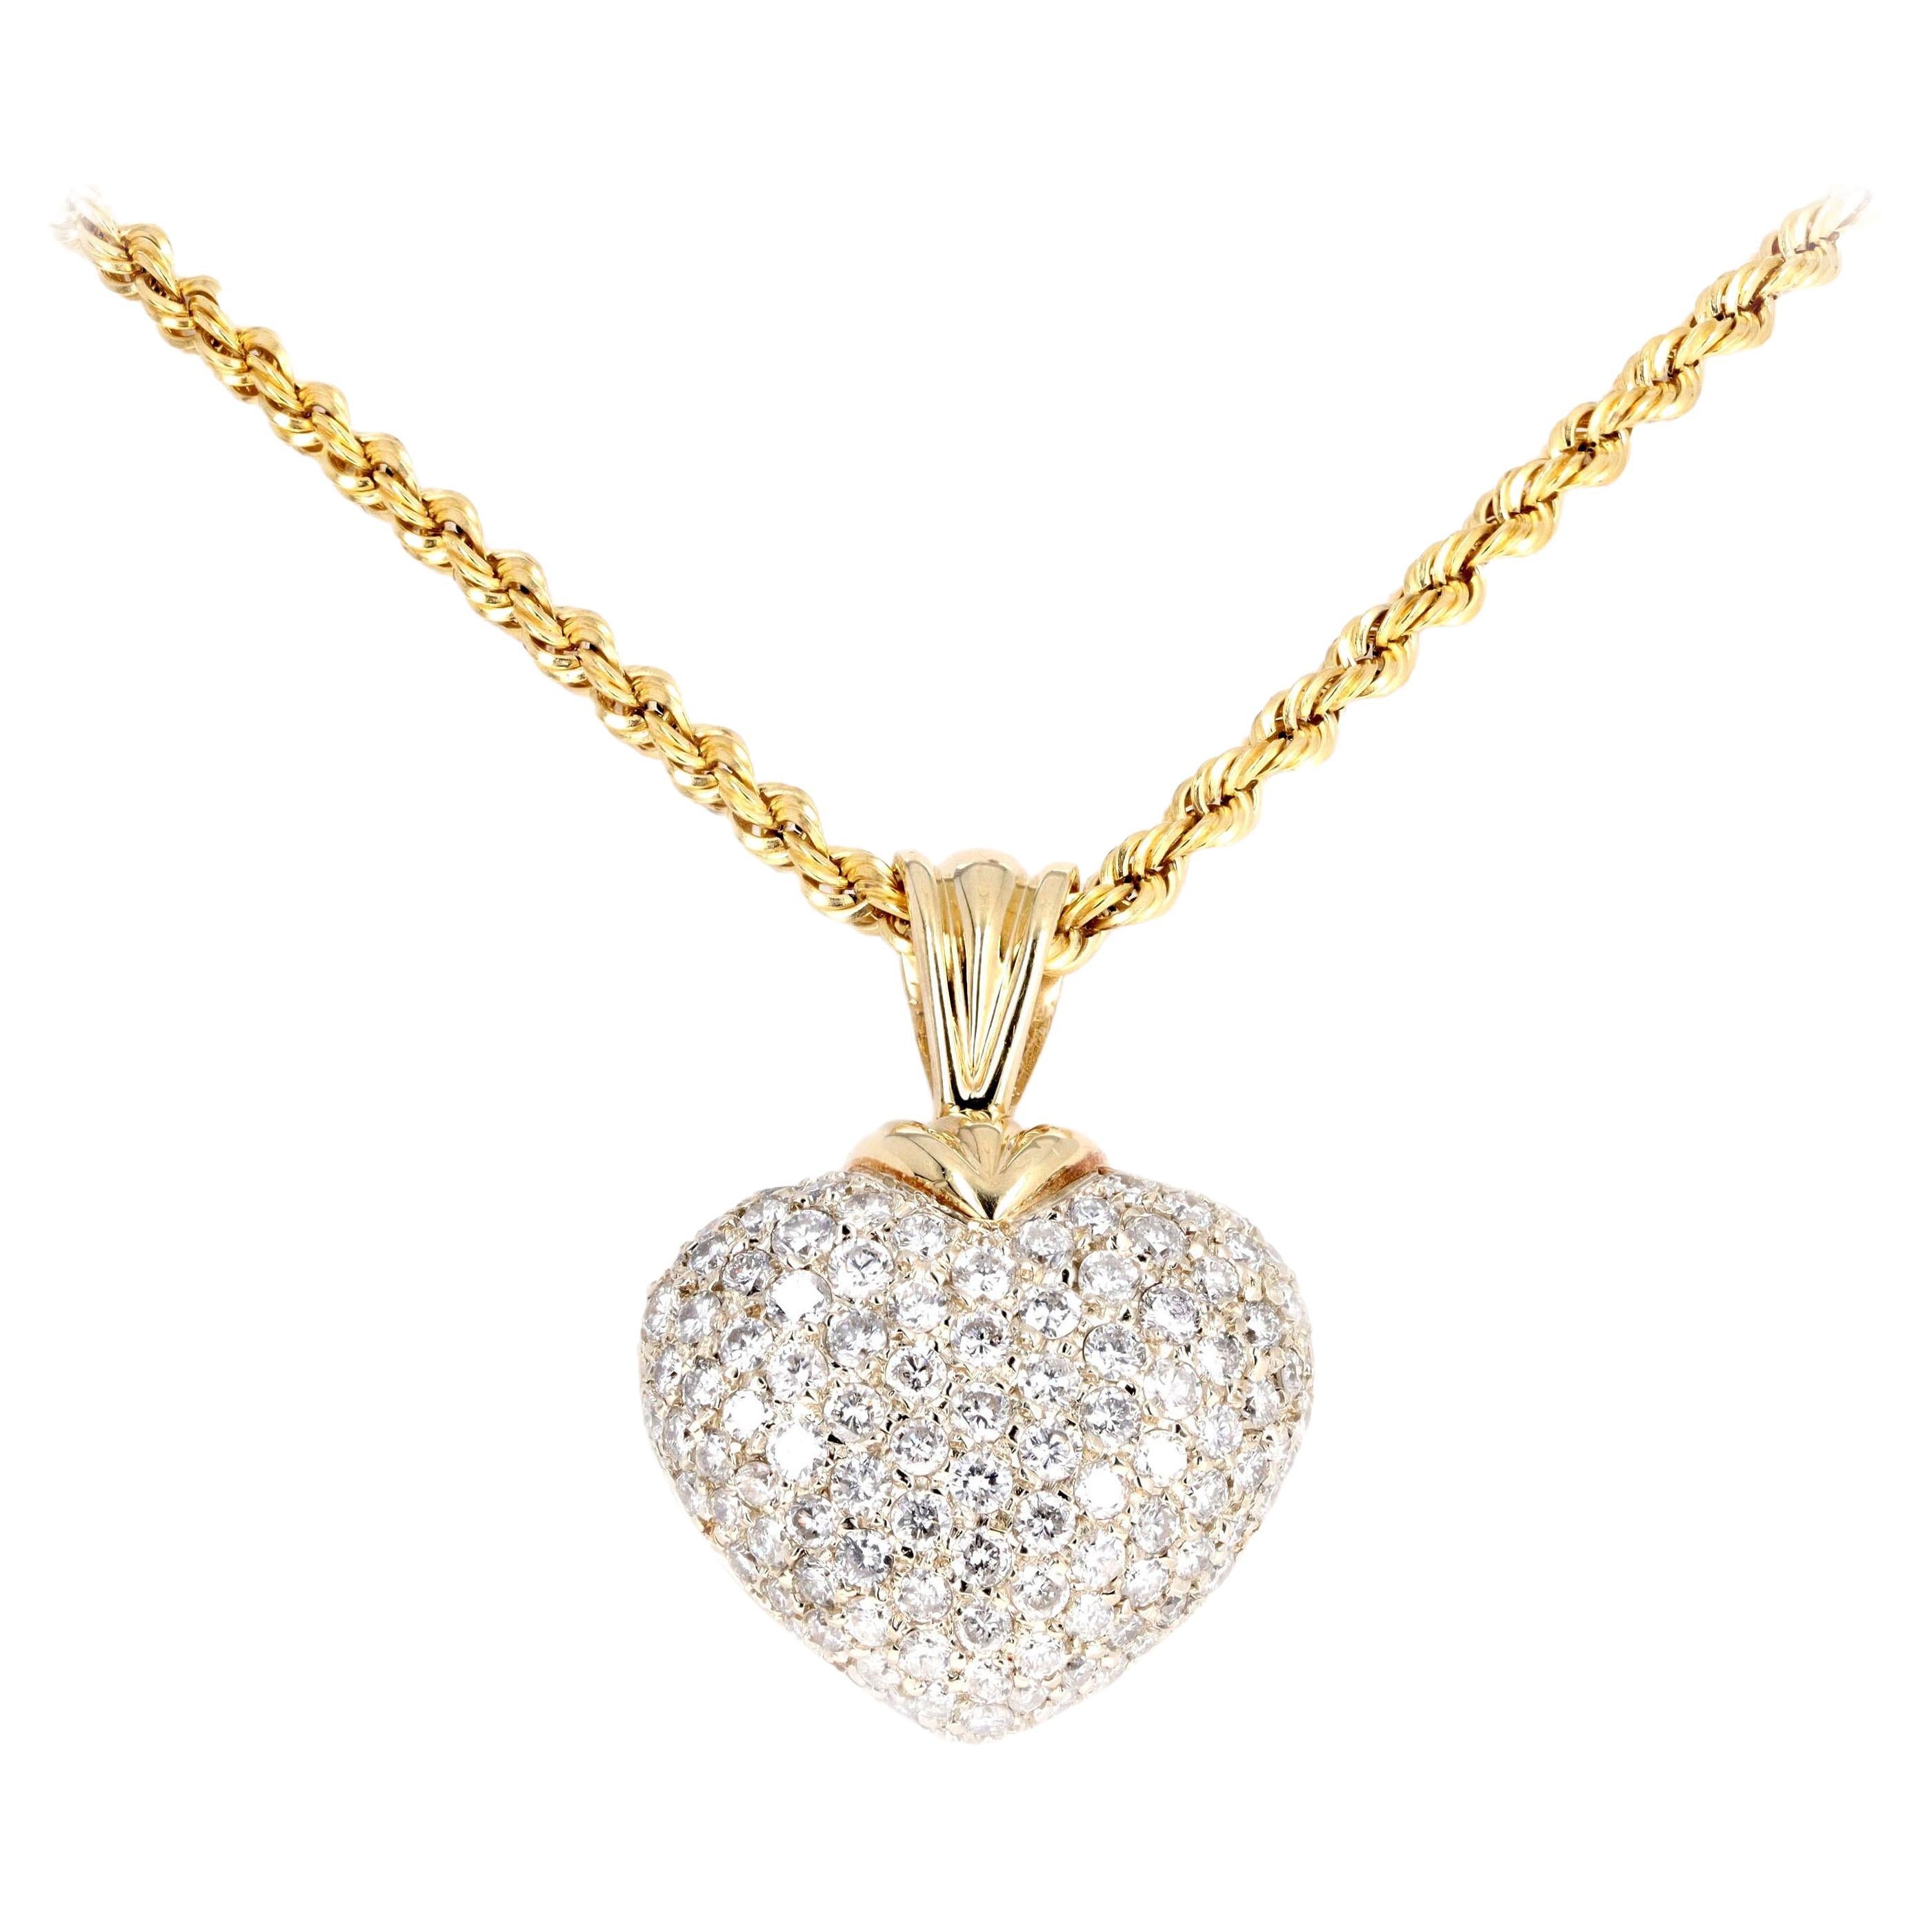 14K Gold 3.5 Carat Total Weight Round Brilliant Diamond Pave Heart Necklace